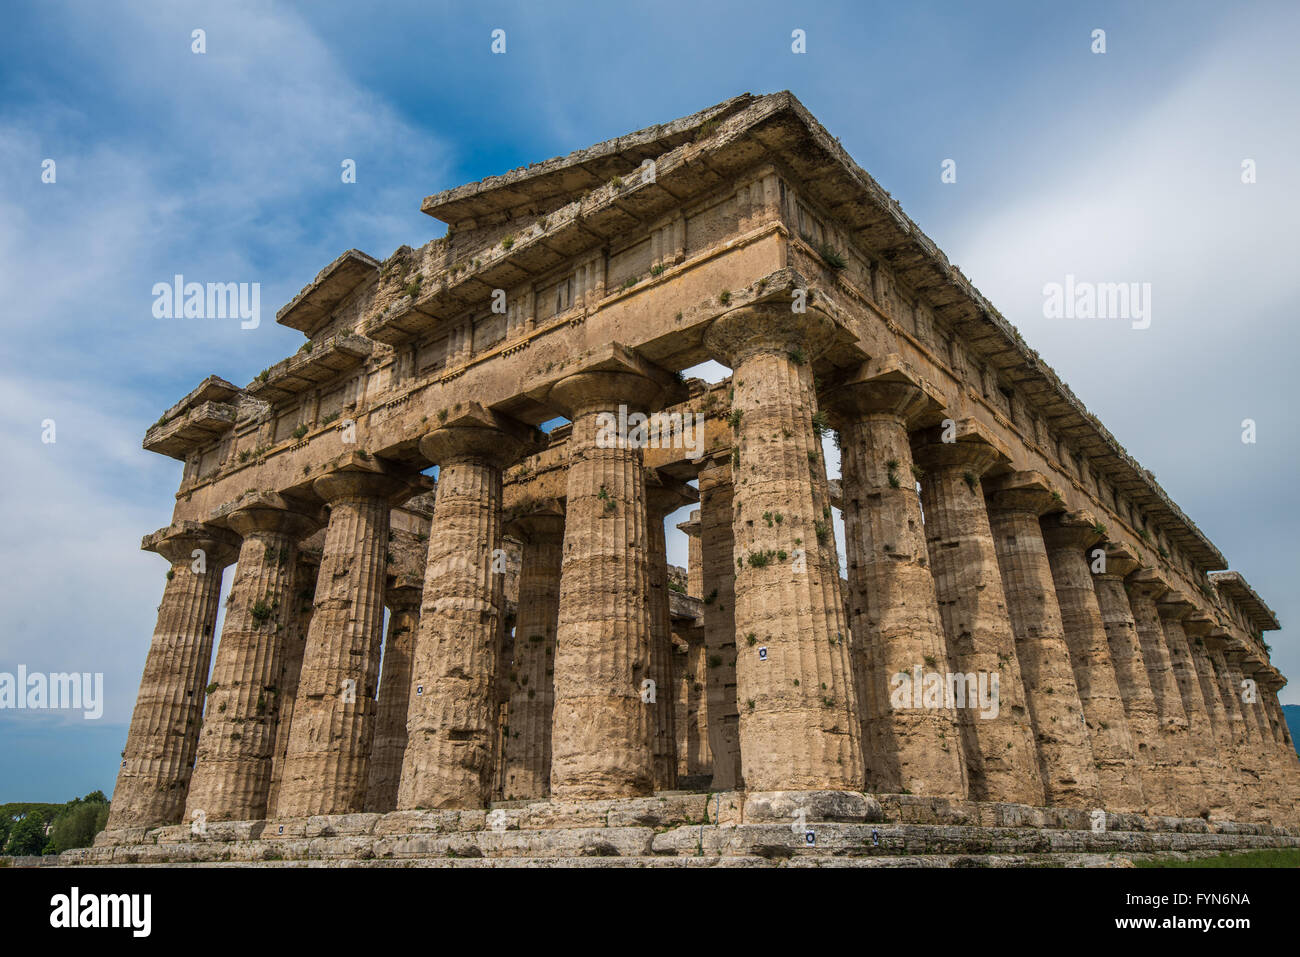 Second temple of Hera at Paestum archaeological site, one of the most well-preserved ancient Greek temples in the world, Provinc Stock Photo